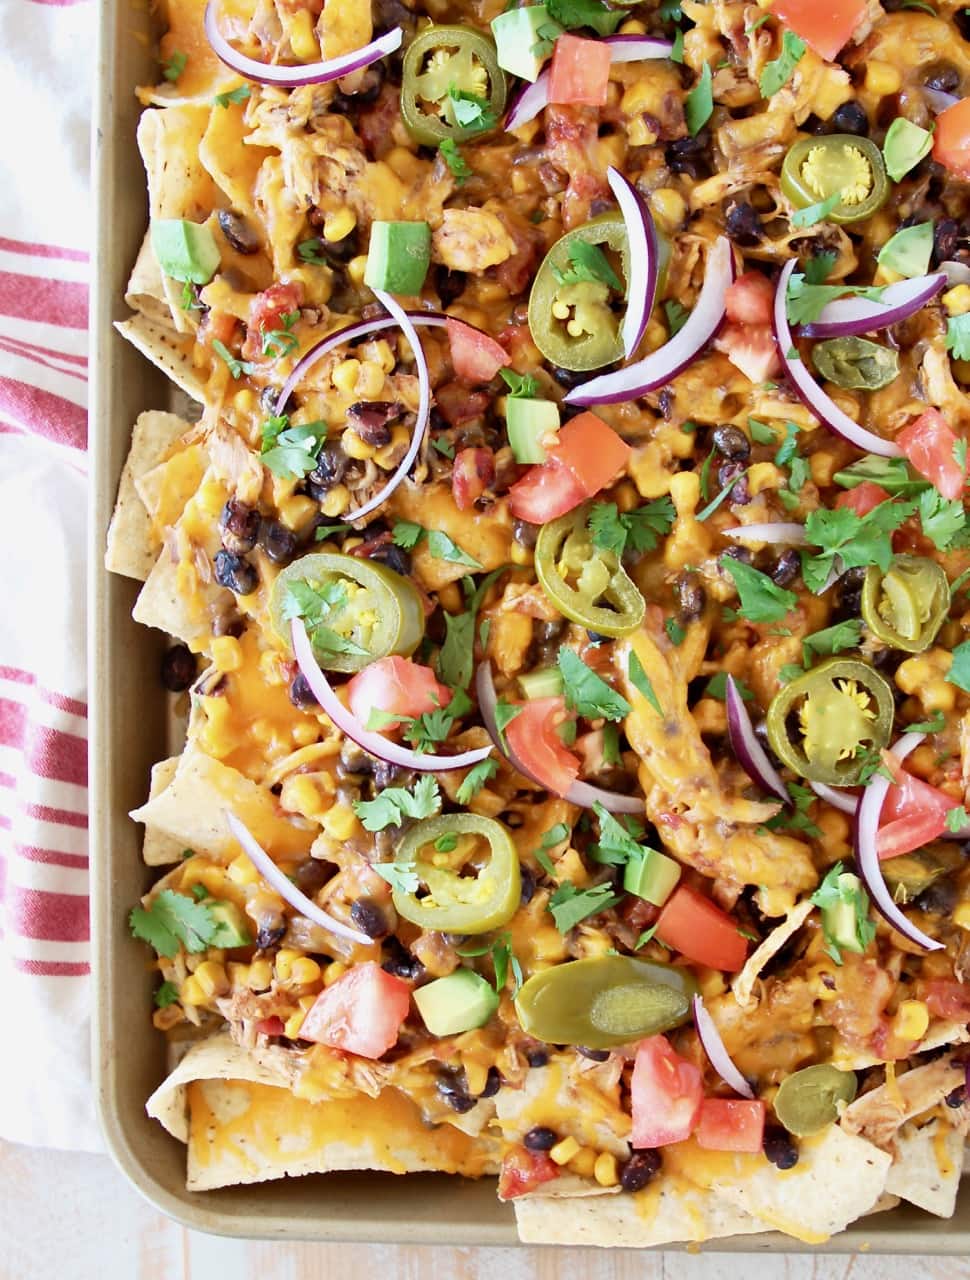 Chicken Nachos on sheet pan topped with jalapenos, red onions, tomatoes and cheese, on red and white striped towel